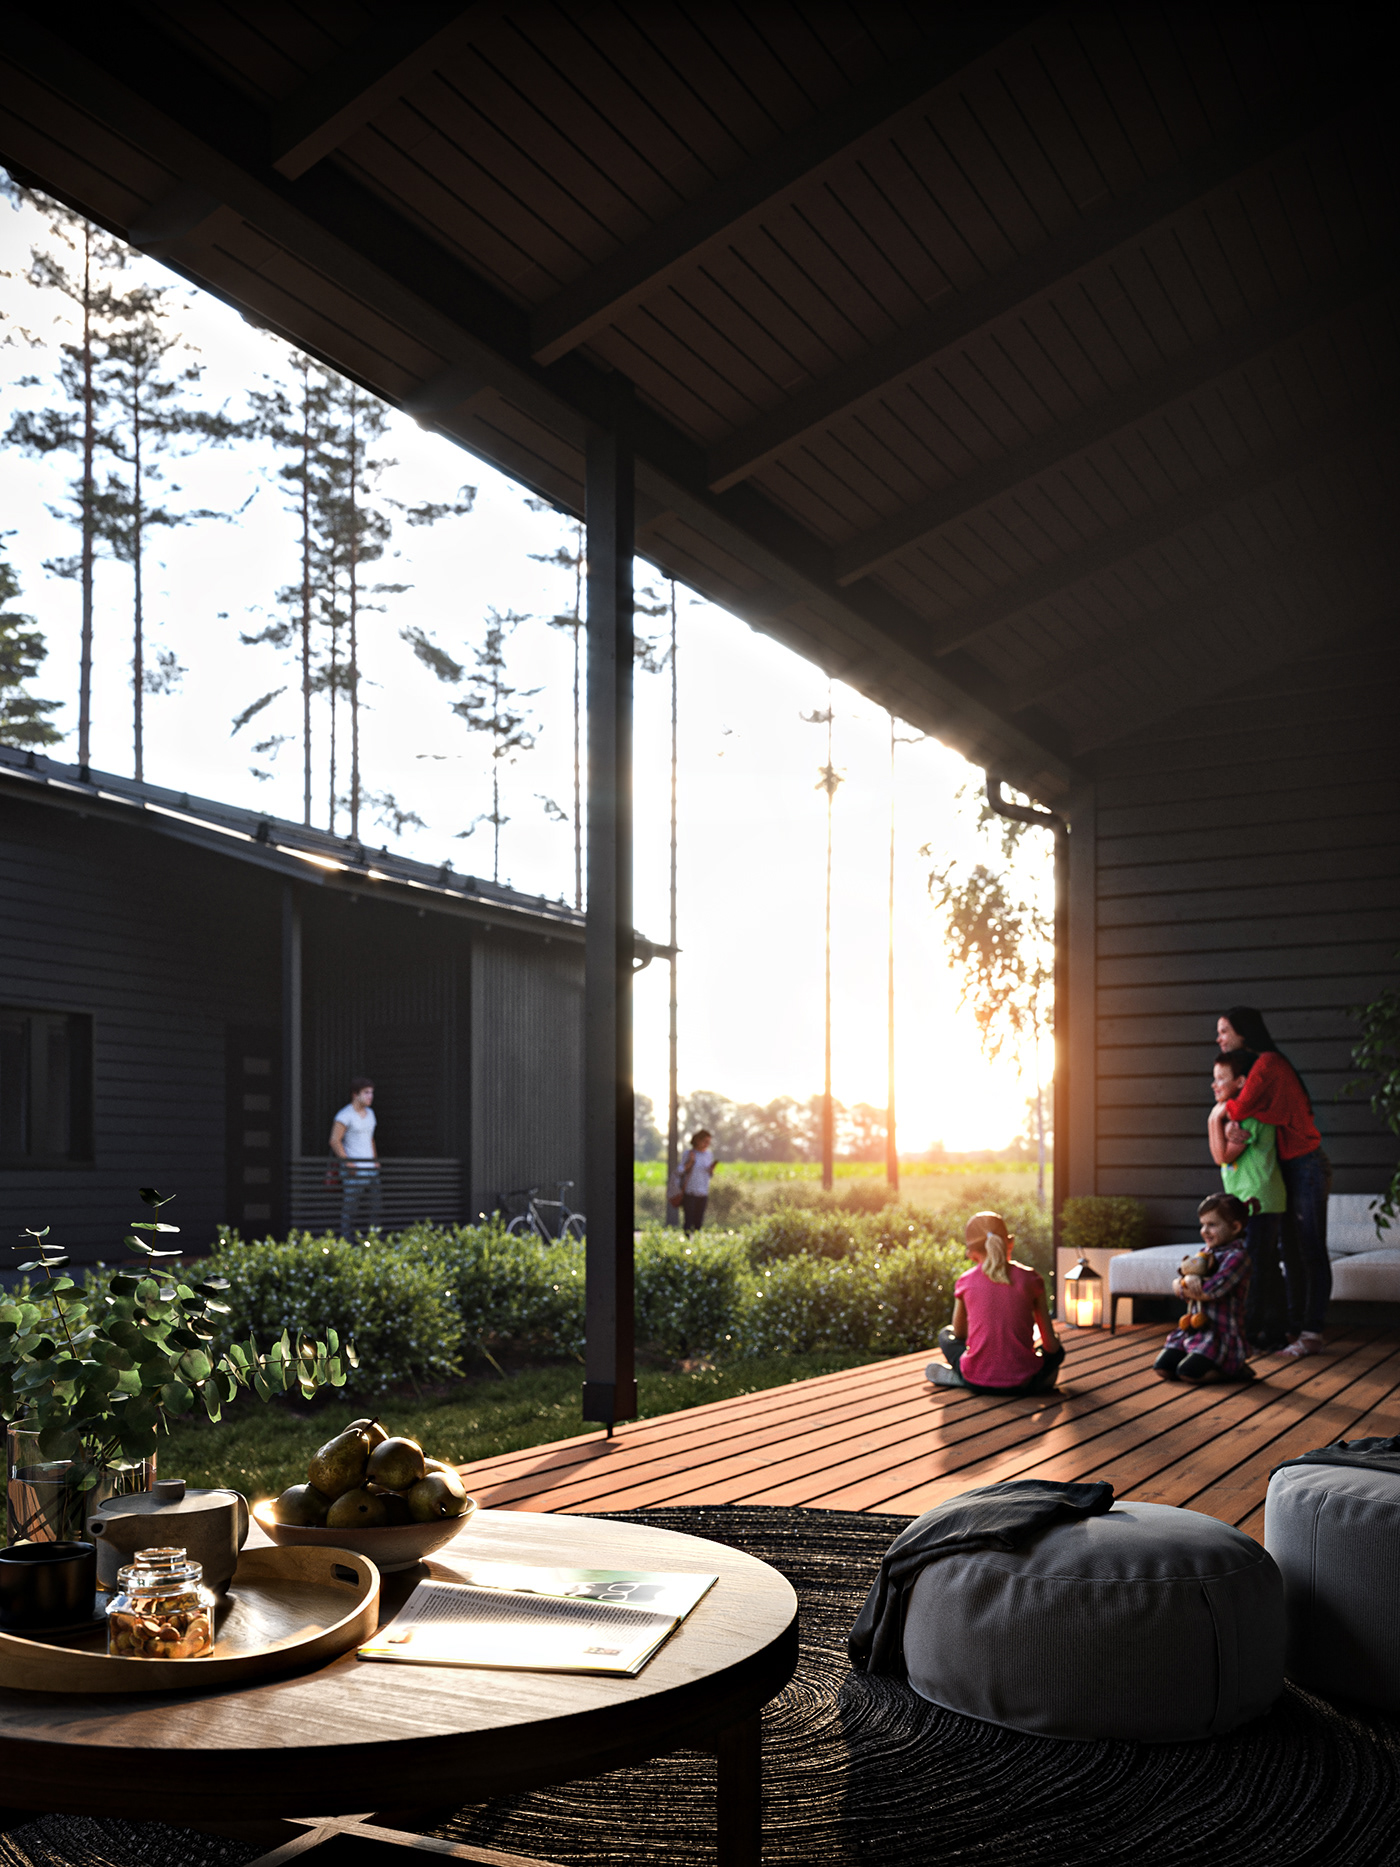 3D 3ds max architecture CG corona house Render sunset V-ray visualization